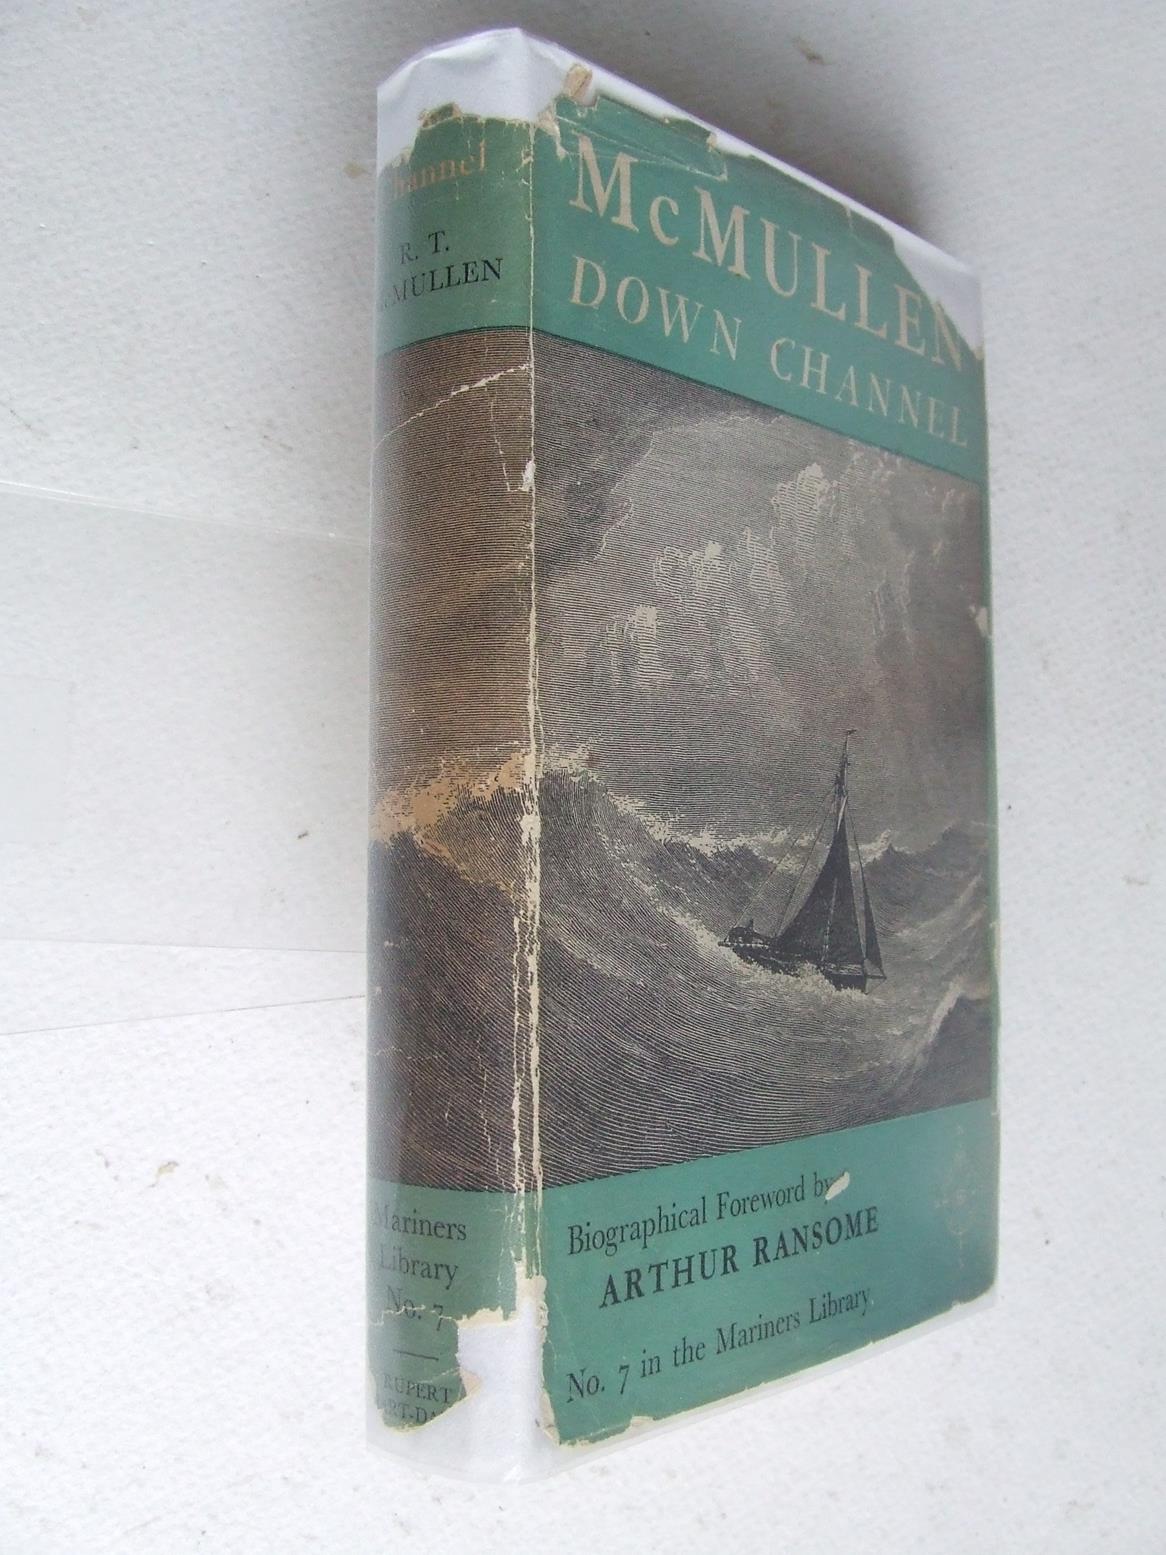 Down Channel. [Mariners Library no.7]